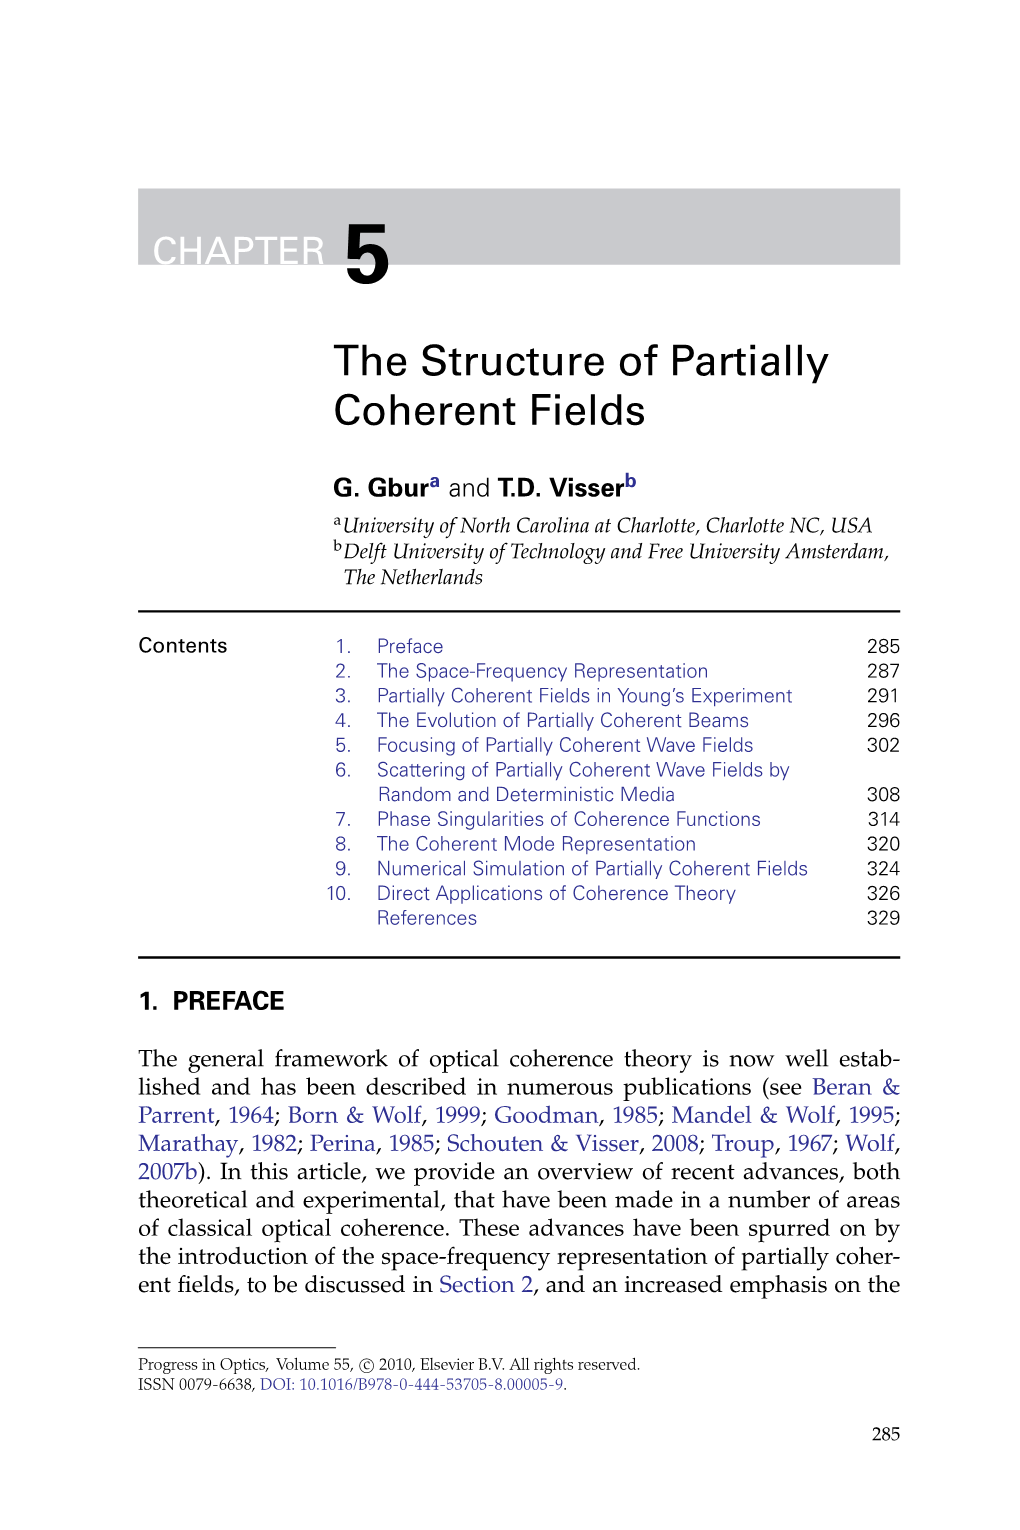 CHAPTER 5 the Structure of Partially Coherent Fields